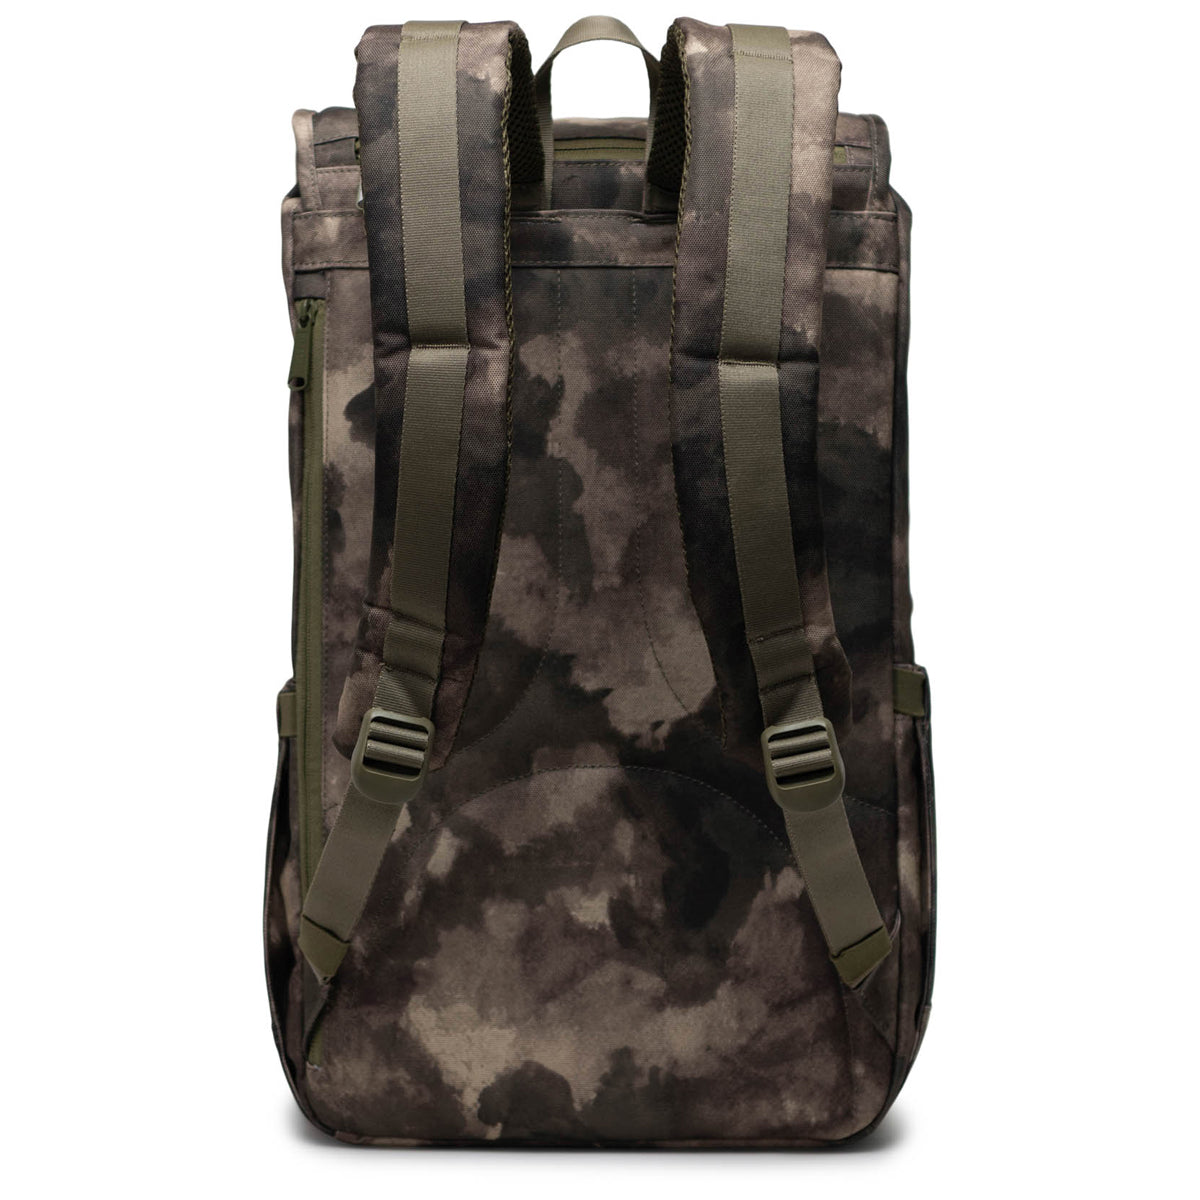 Herschel Supply Little America Backpack - Painted Camo image 2